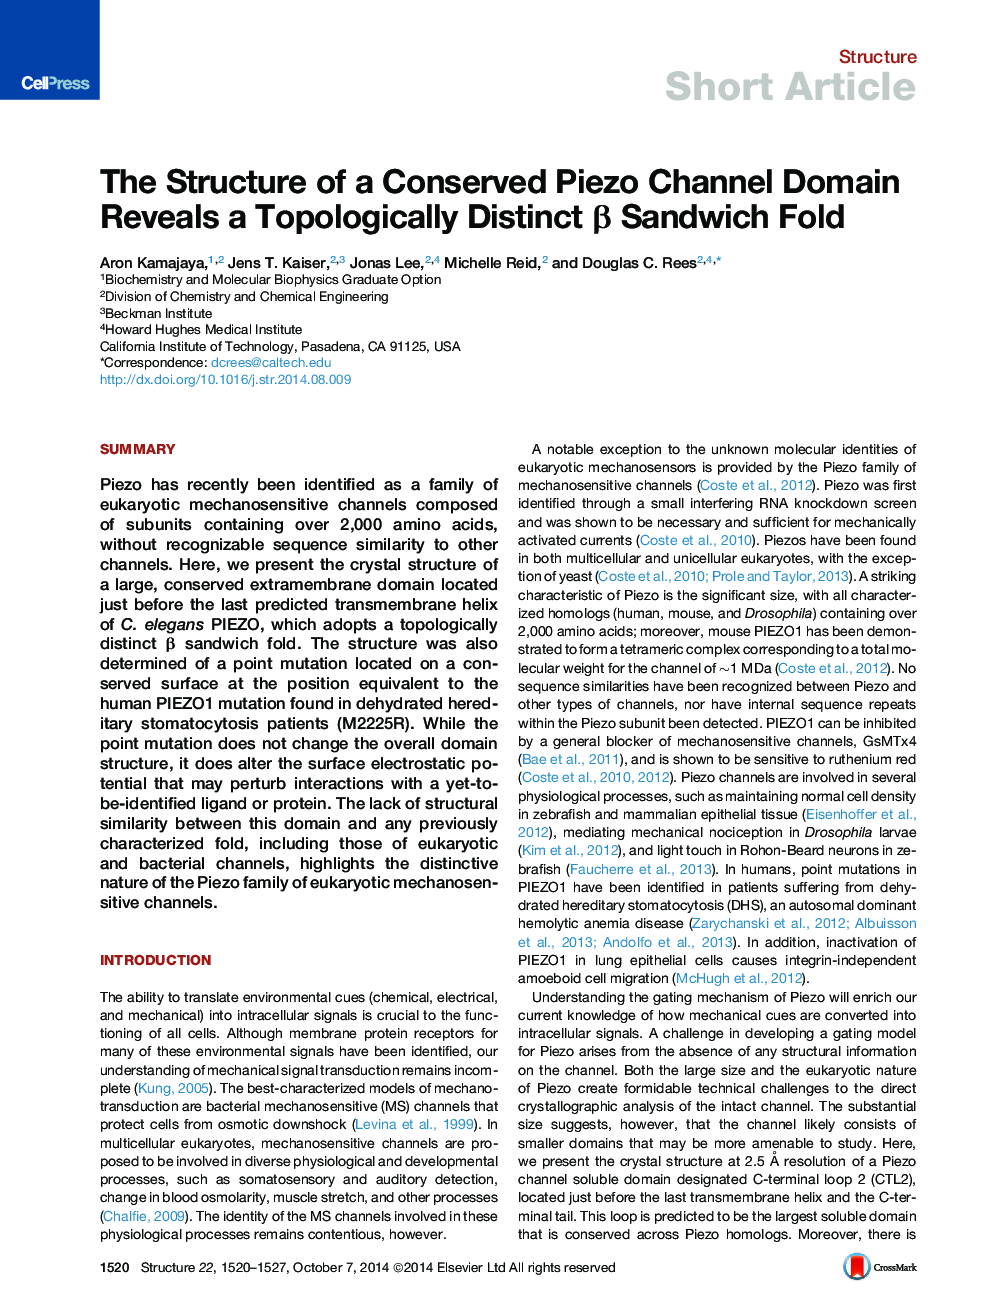 The Structure of a Conserved Piezo Channel Domain Reveals a Topologically Distinct β Sandwich Fold